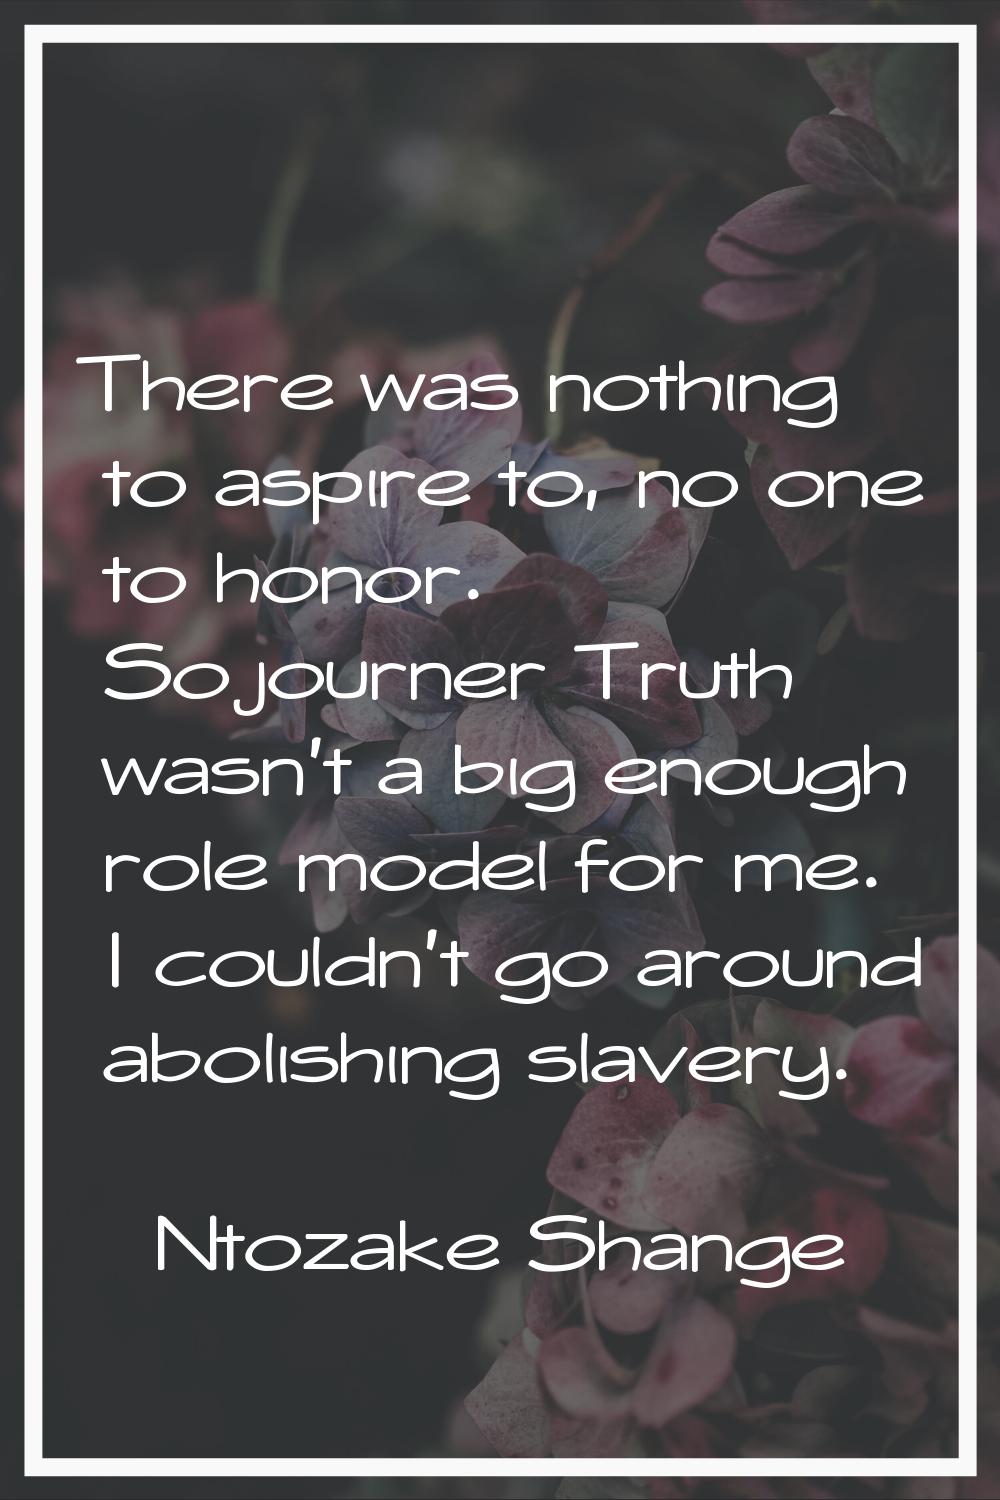 There was nothing to aspire to, no one to honor. Sojourner Truth wasn't a big enough role model for